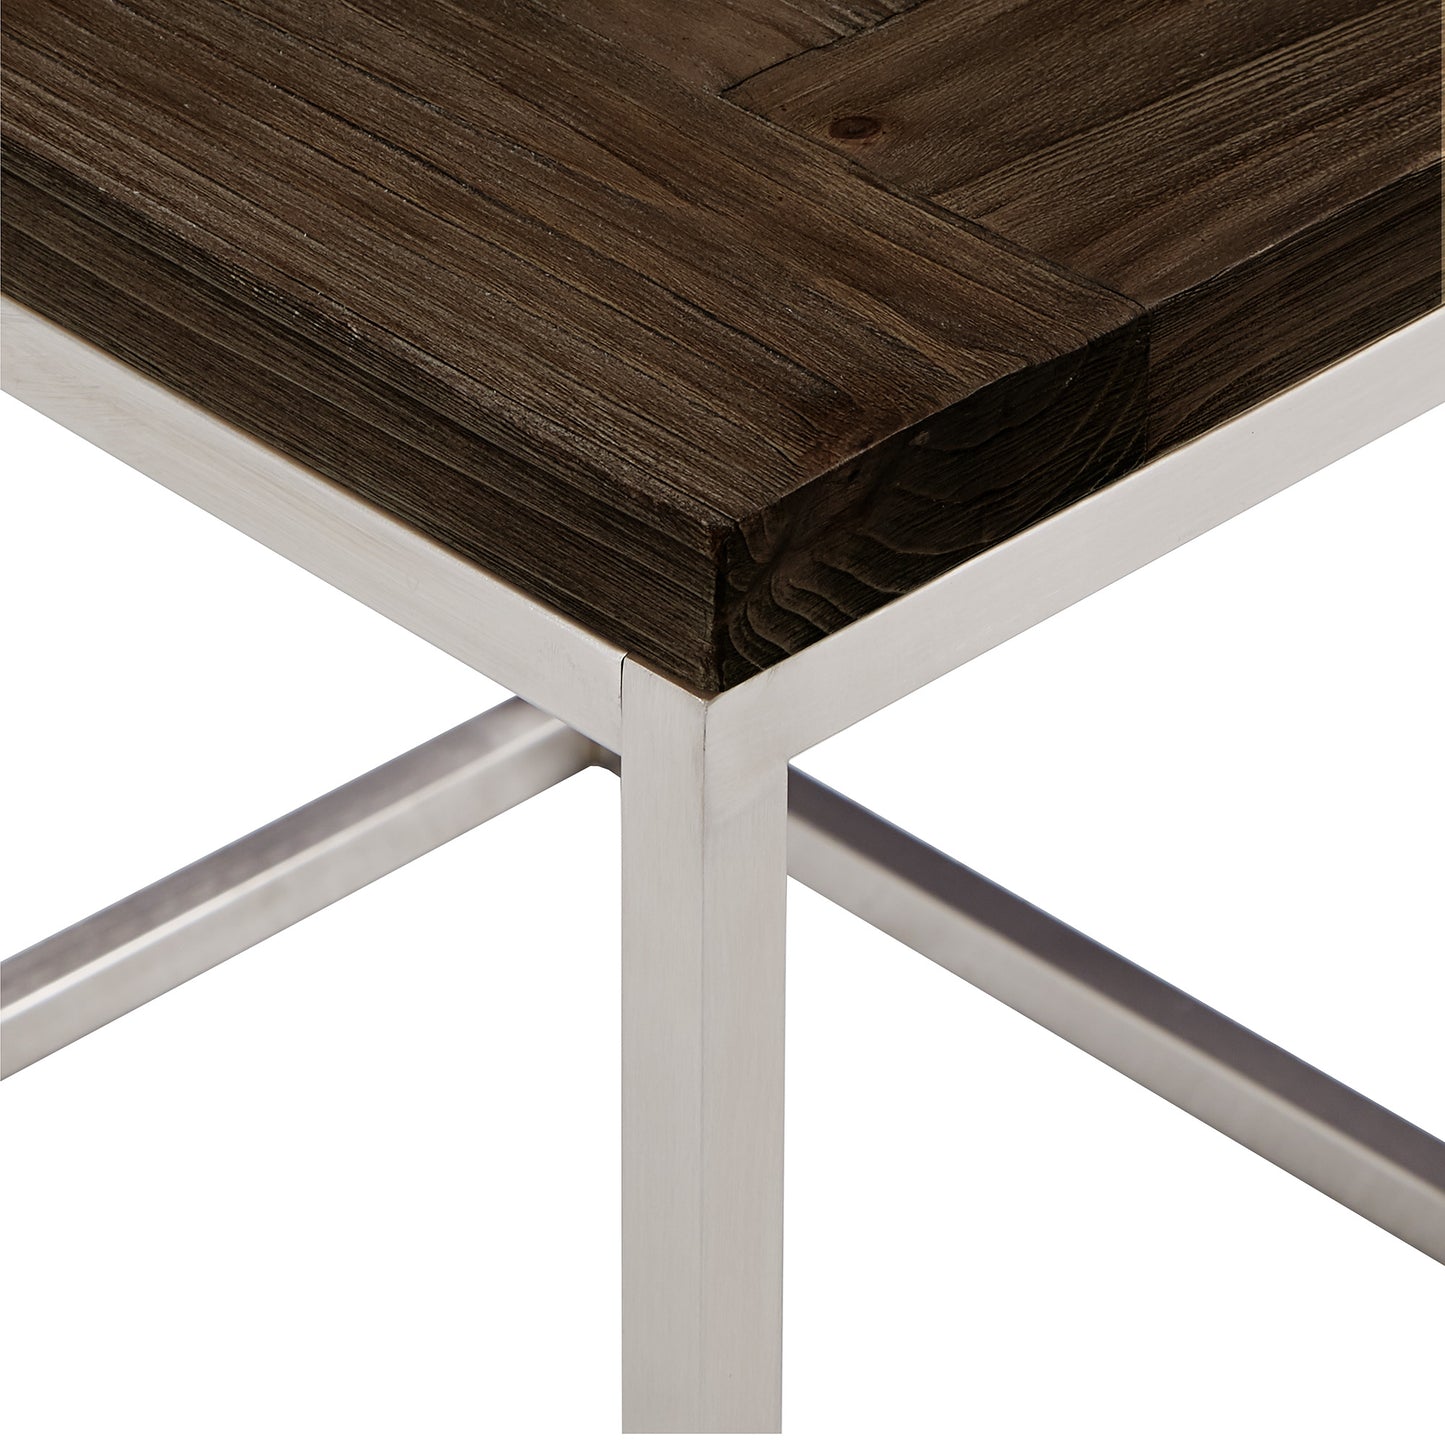 Local Pickup Only - Stainless Steel Rectangular End Table - Brown Finish Top